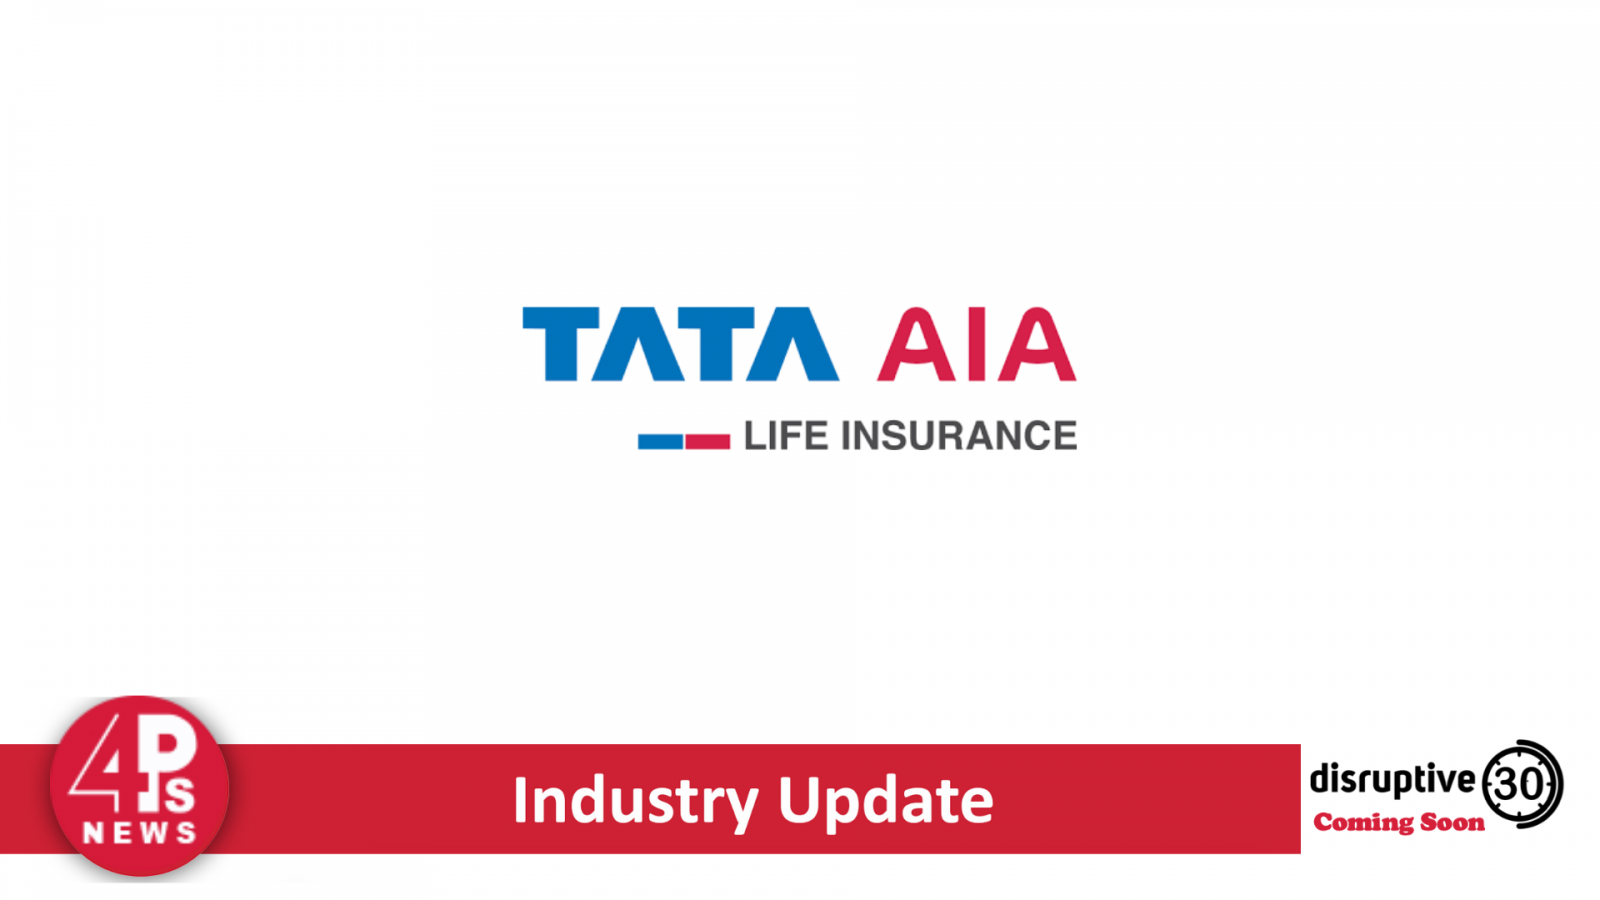 csc and tata aia life insurance coverage collaborate to make insurance coverage obtainable in rural india